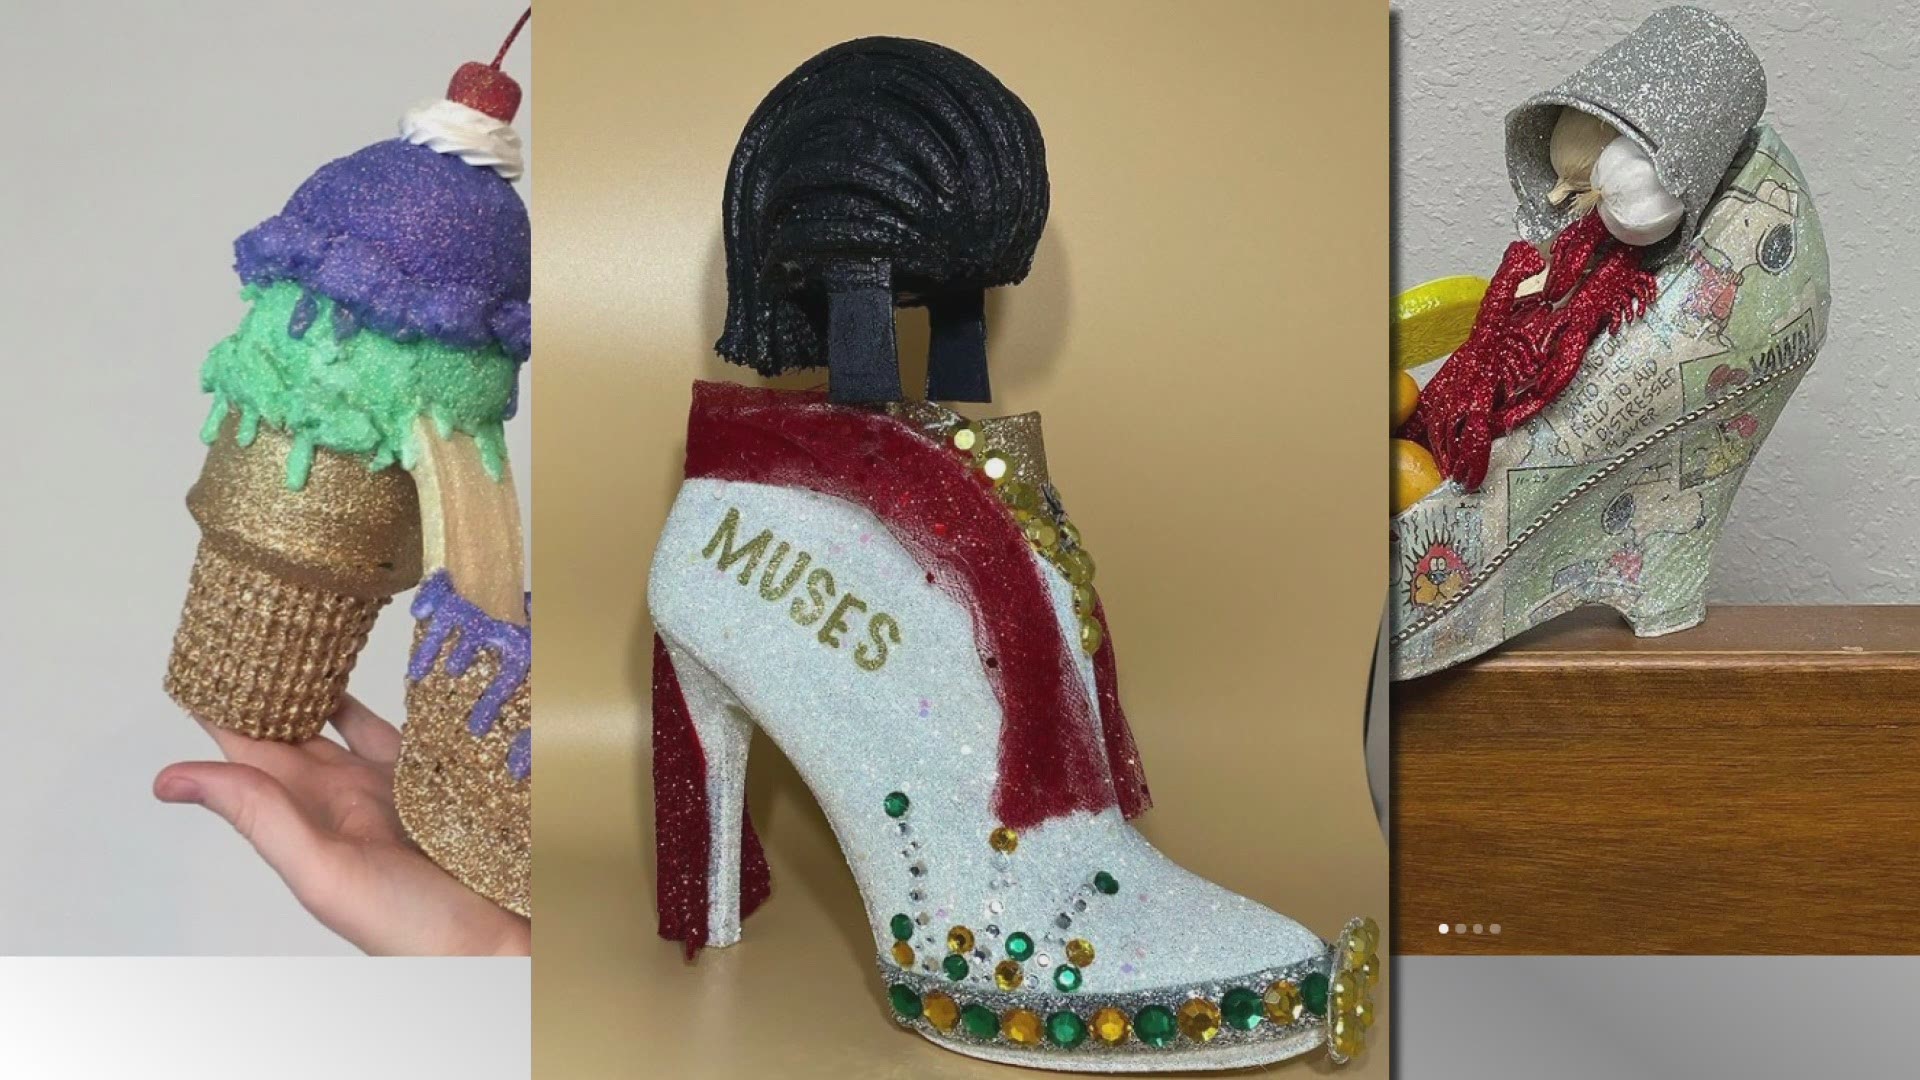 The Krewe of Muses will be going around the city to hand out some of its signature shoes on Thursday, even though they can't parade.